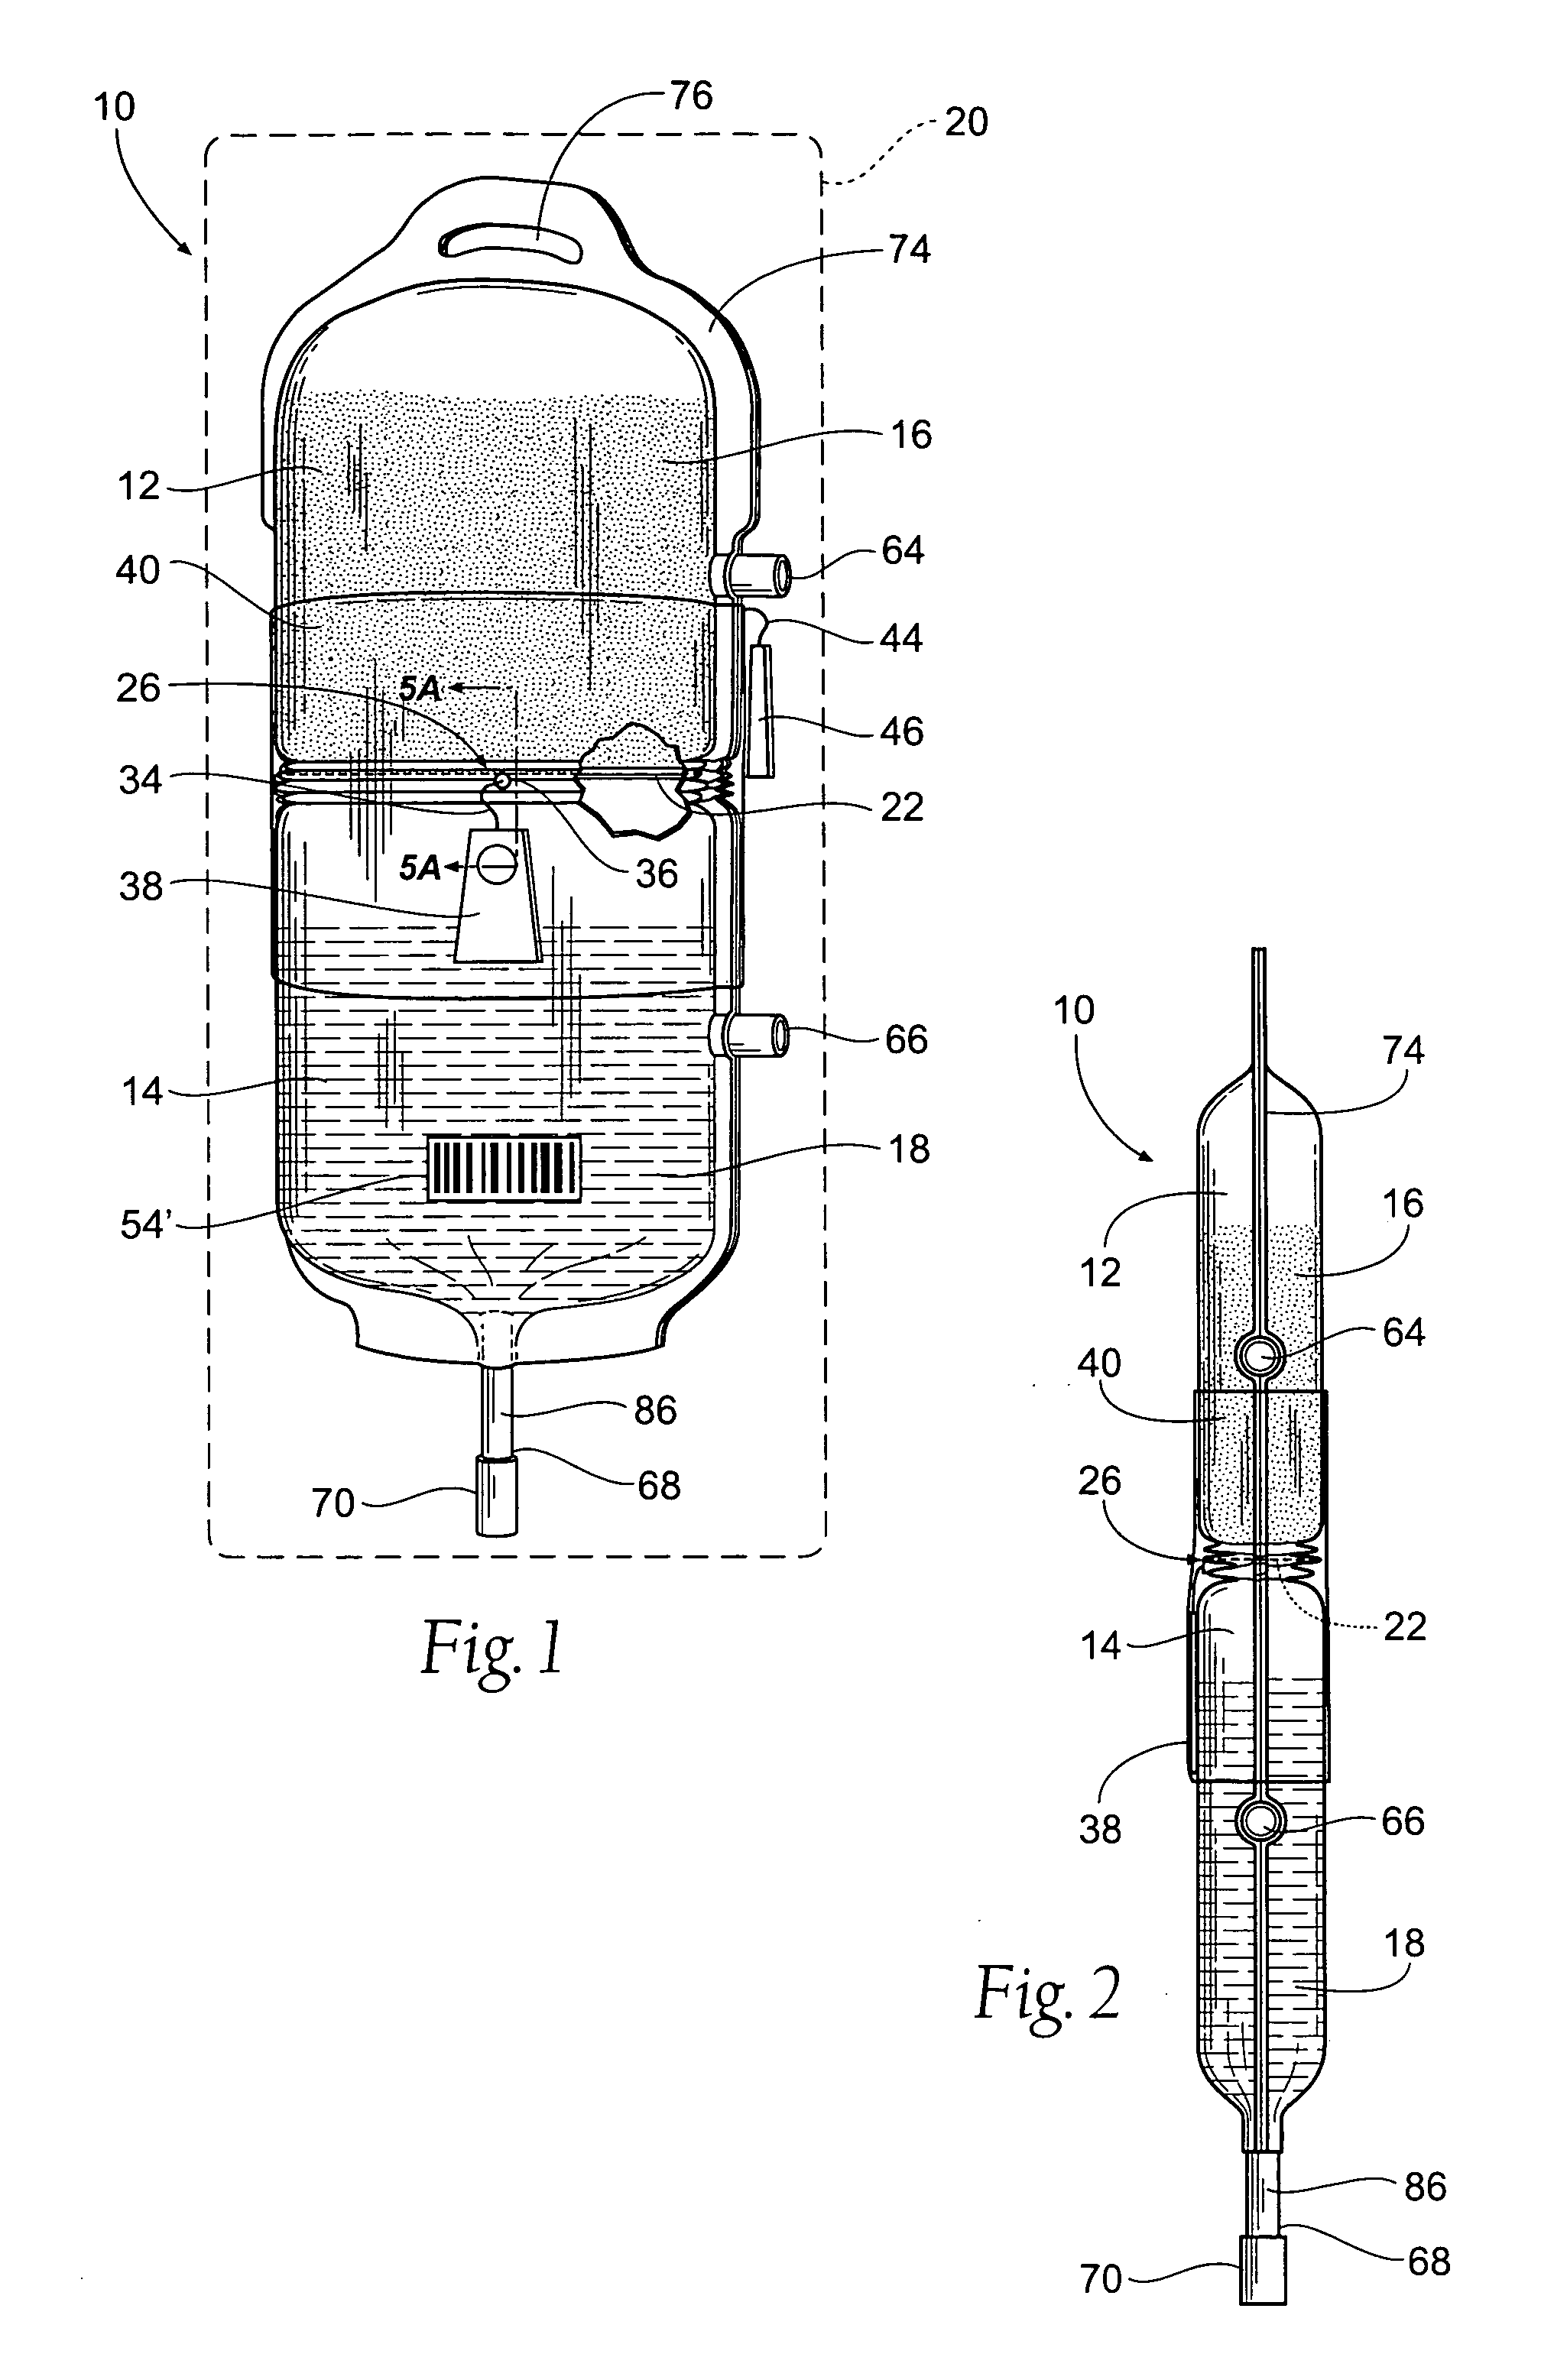 Apparatus and methods for making, storing, and administering freeze-dried materials such as freeze-dried plasma